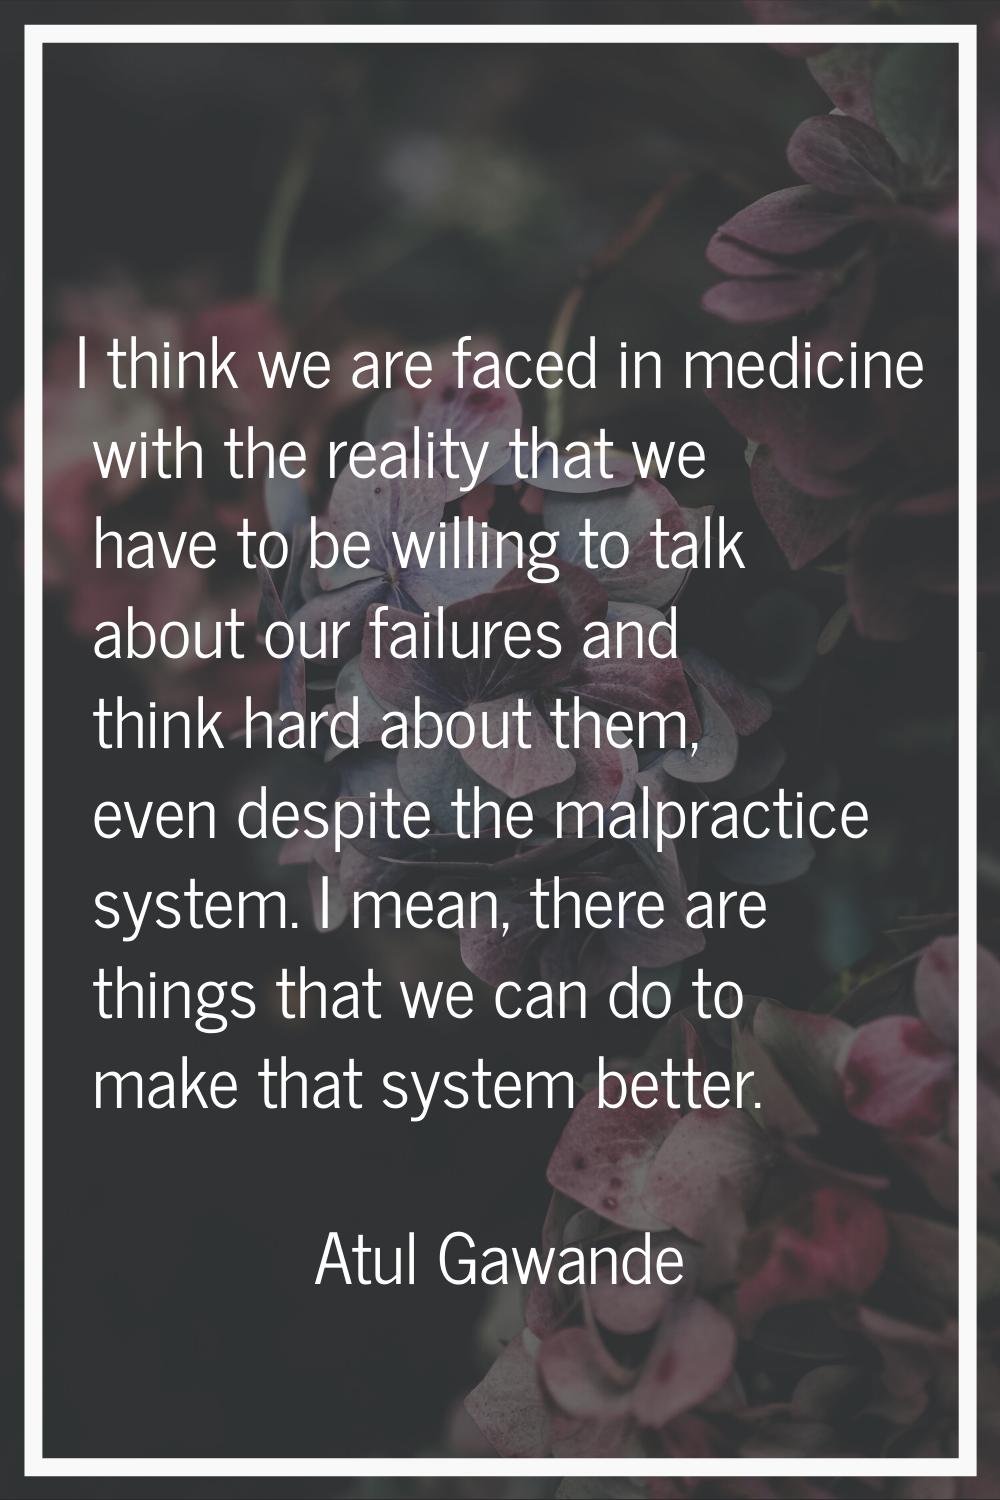 I think we are faced in medicine with the reality that we have to be willing to talk about our fail